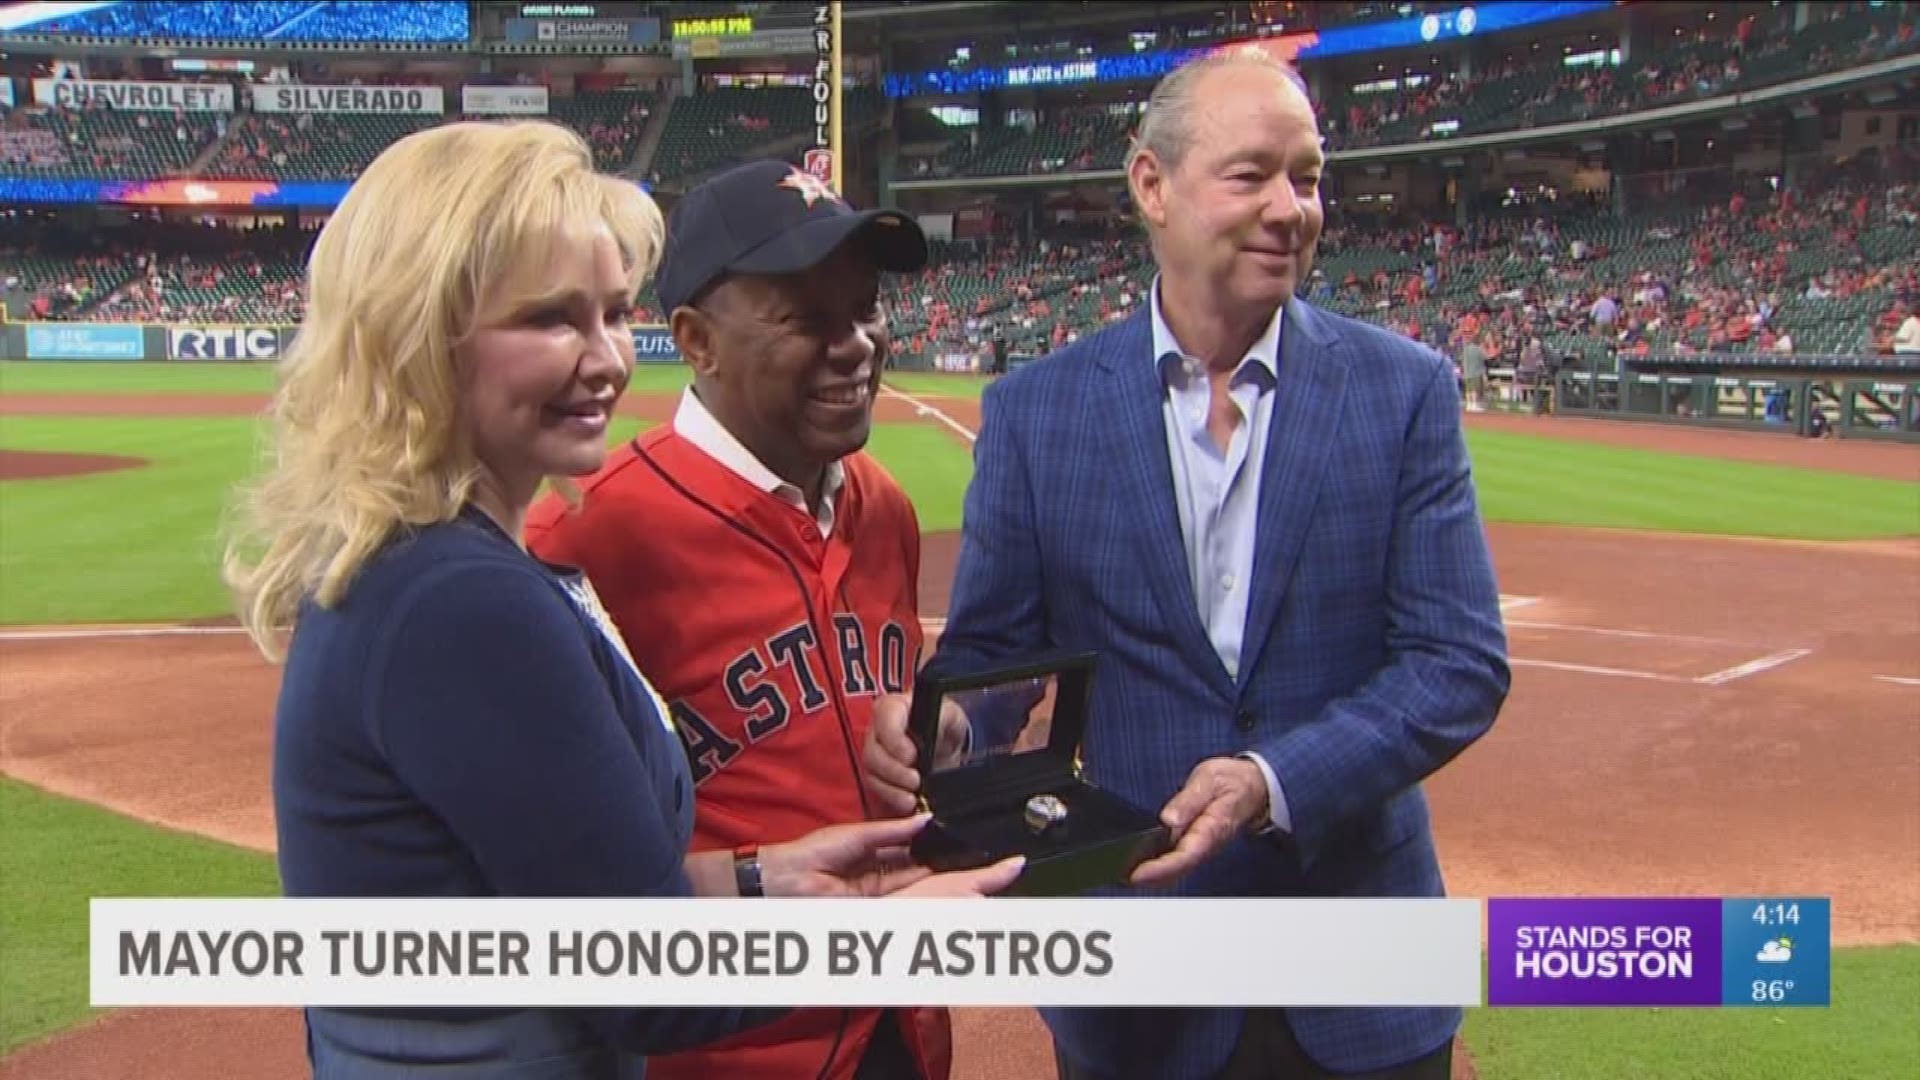 Houston mayor Sylvester Turner was honored with his own Astros World Series ring and threw the first pitch before the team's first game against the Toronto Blue Jays.